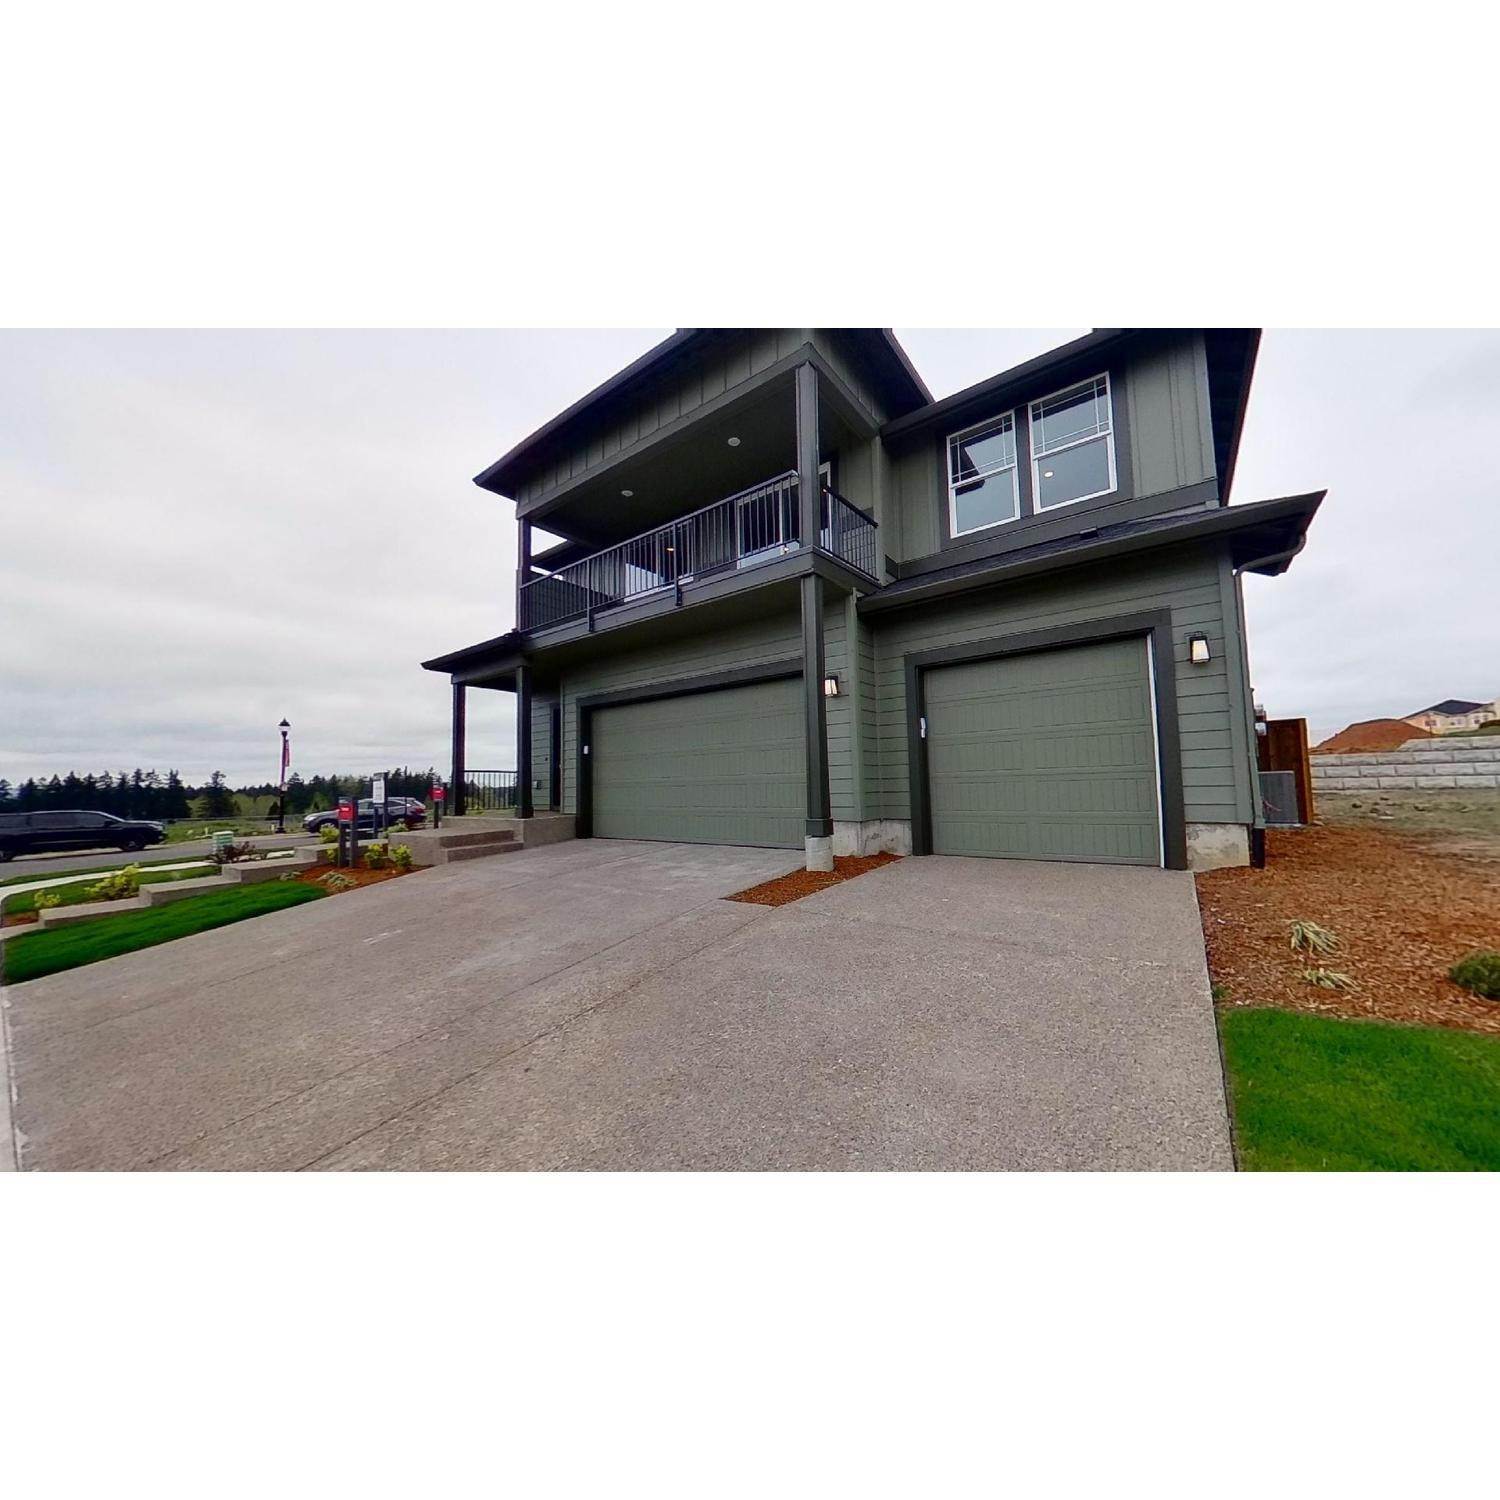 19. 16786 SW Leaf Lane, Tigard, OR 97224에 South River Terrace Innovate Condominiums 건물